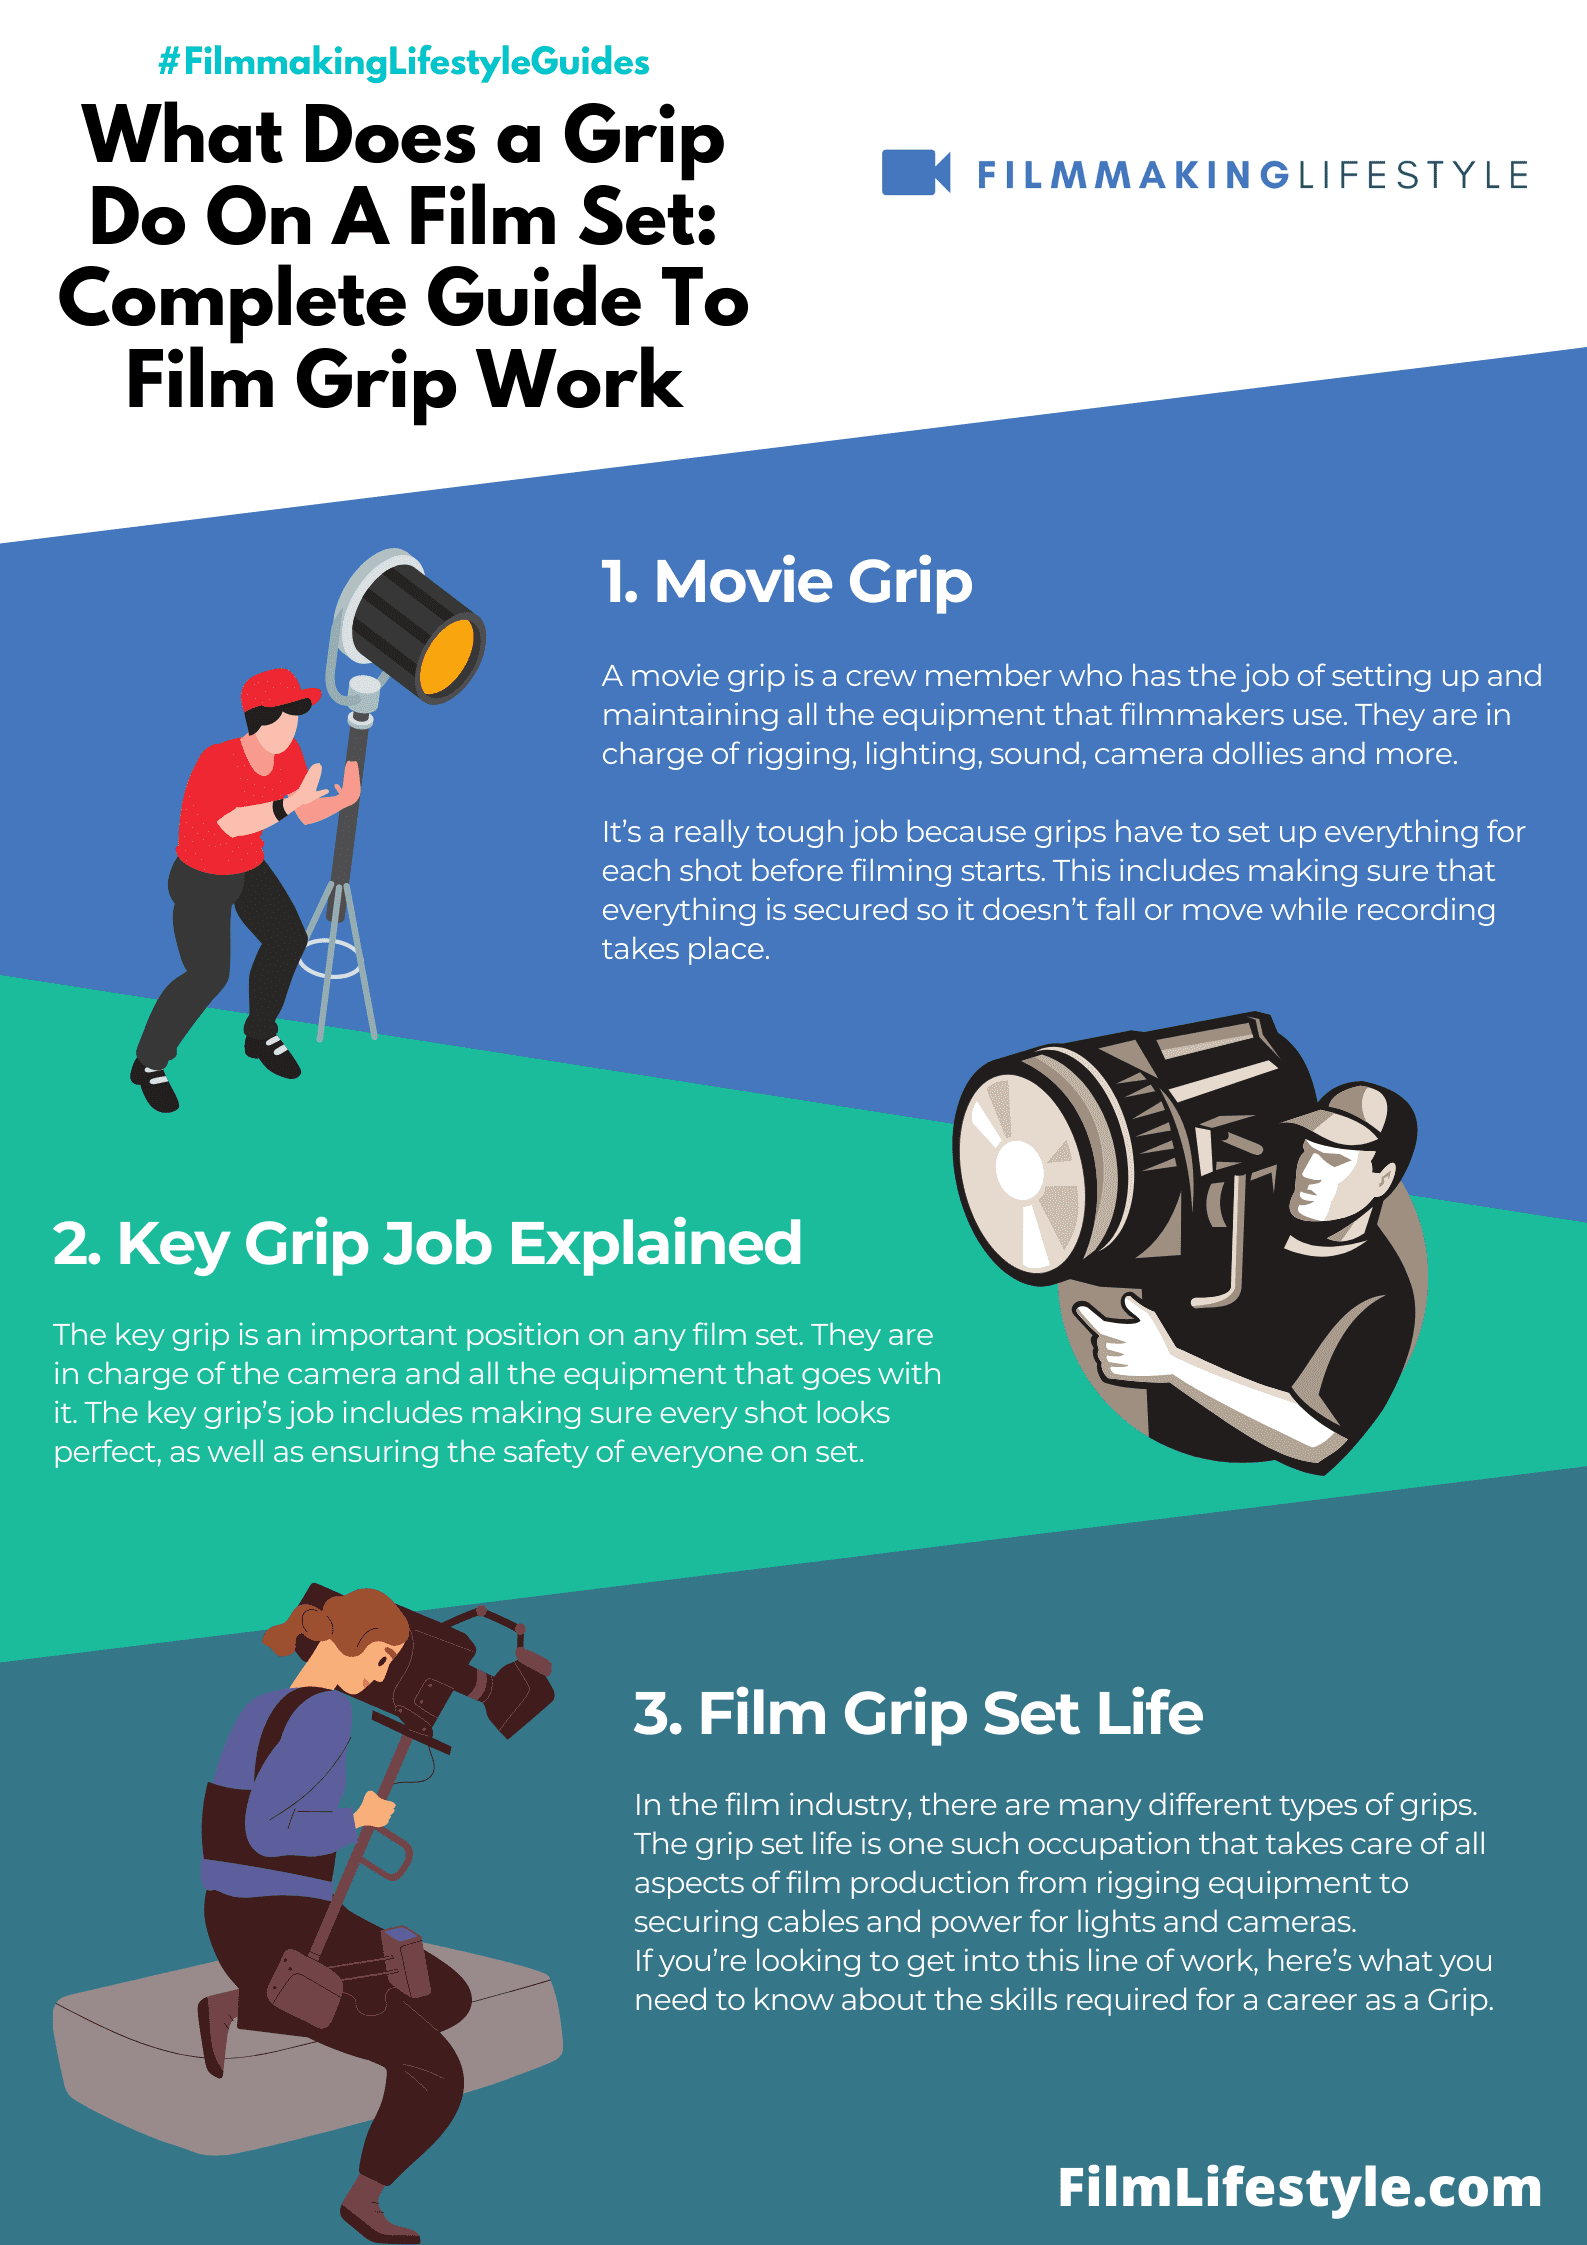 What Does a Grip Do